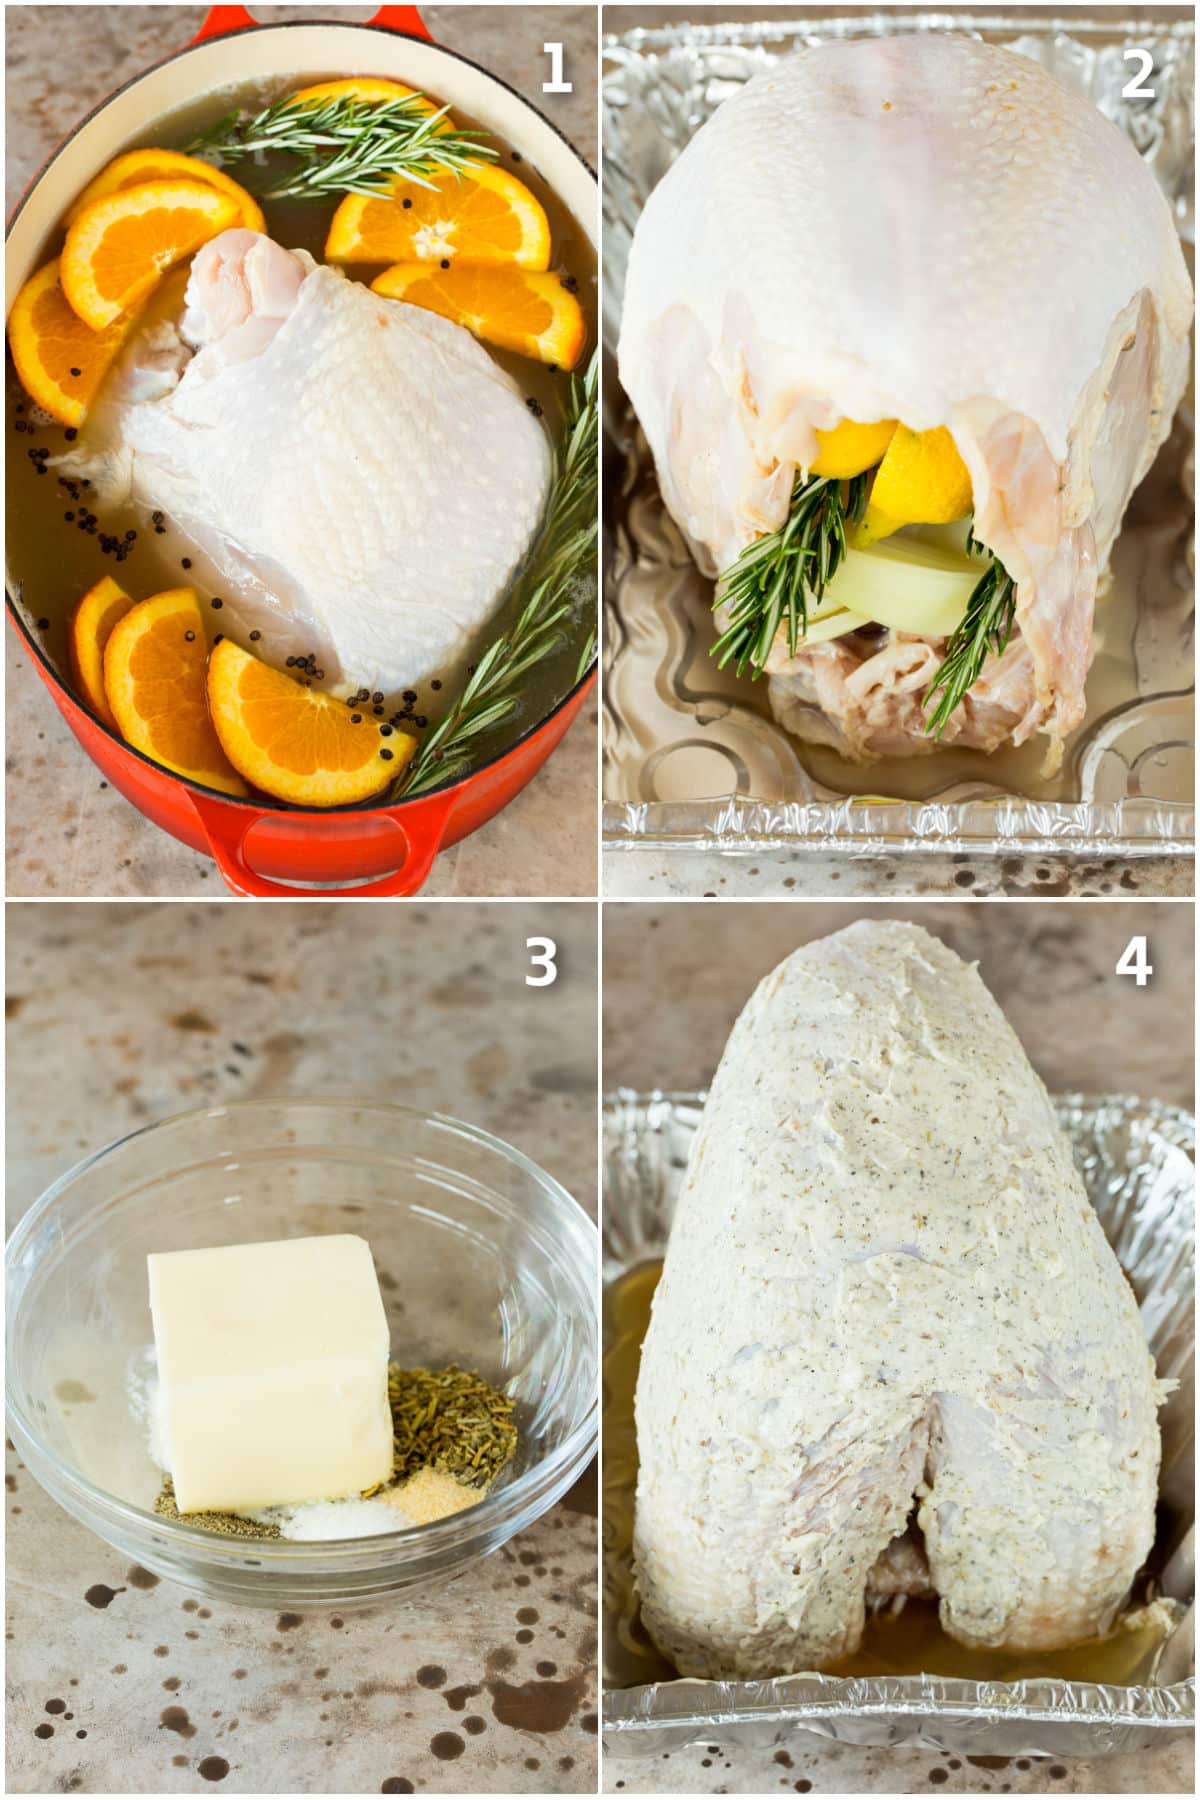 Turkey in brine, then stuffed with herbs and coated in butter.